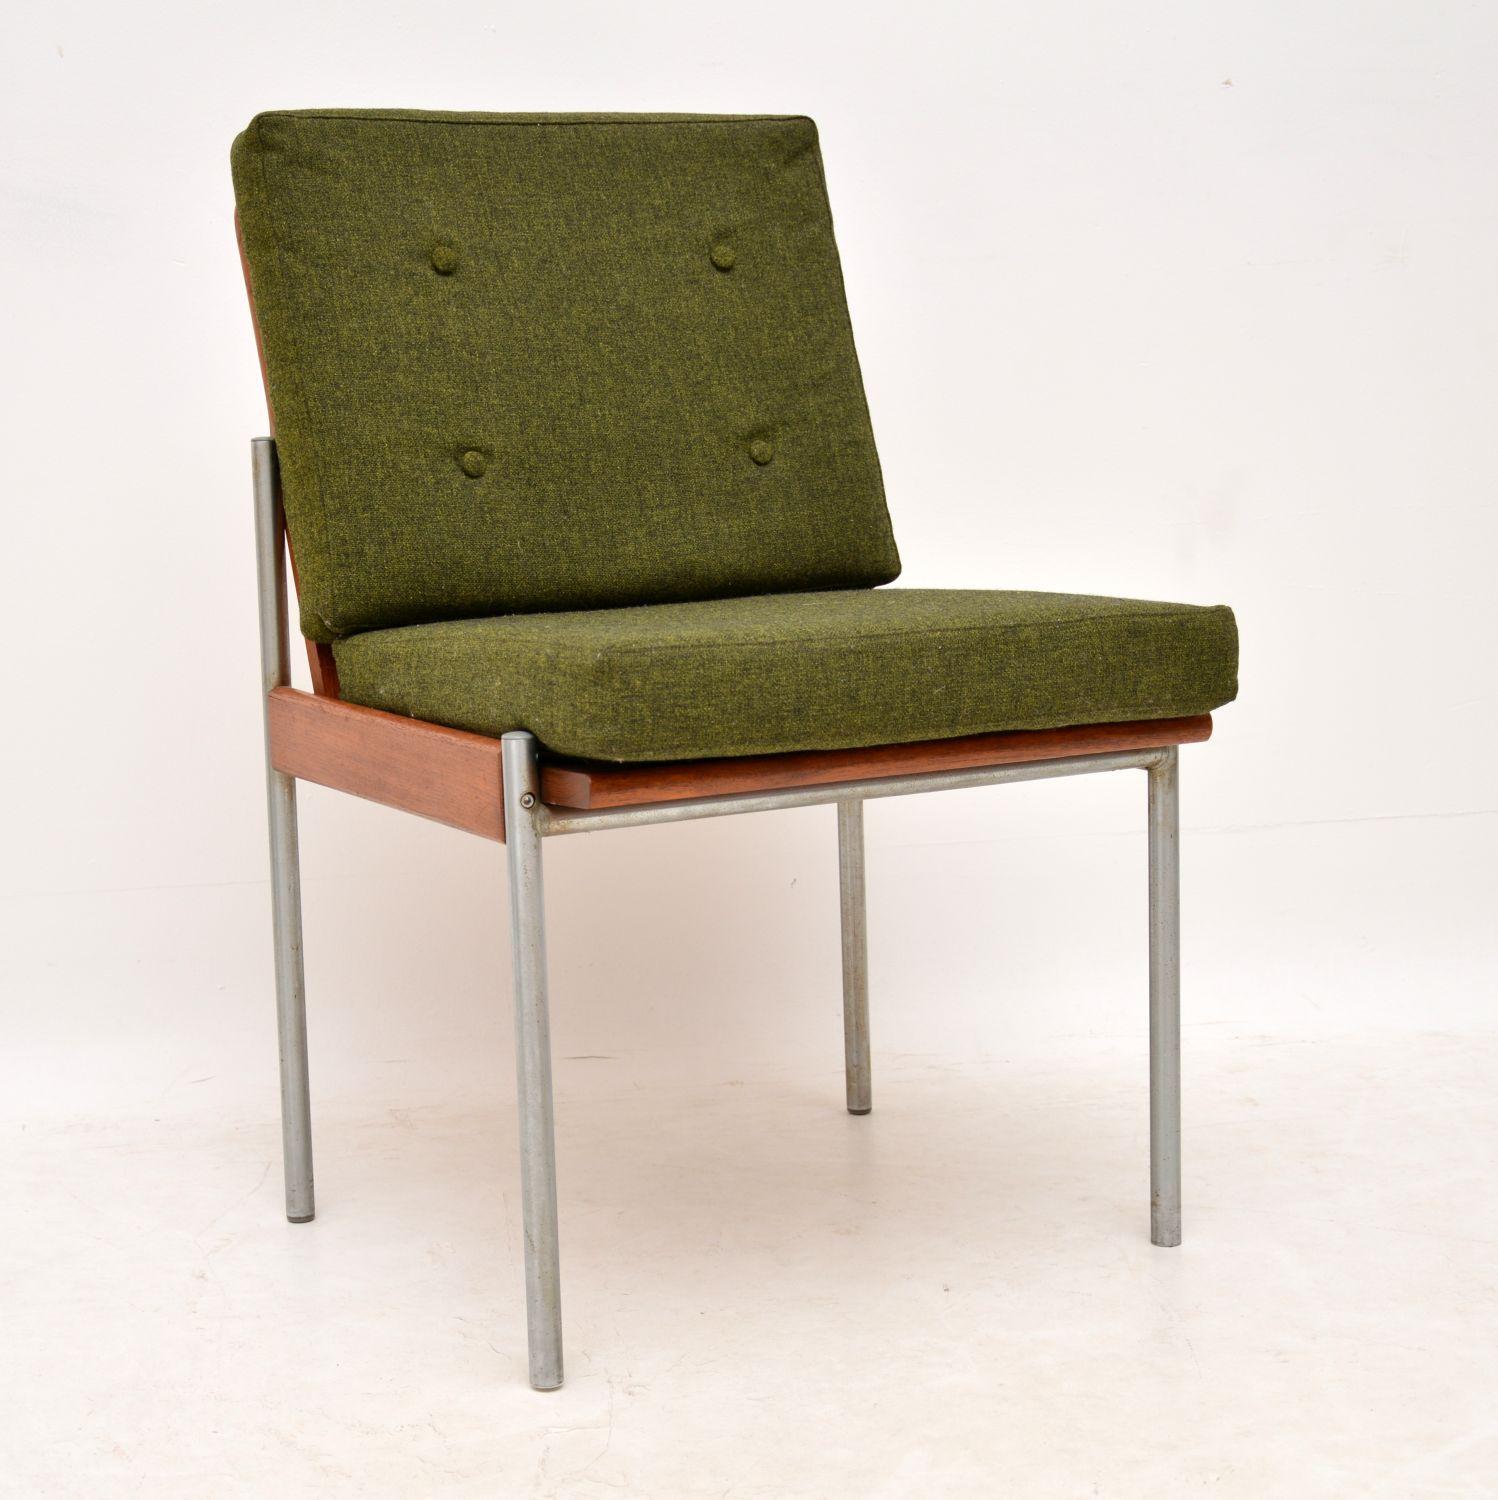 An unusual, stylish and very comfortable side chair, this dates from the 1970s. It has an aluminum and teak frame, with green loose cushions. The condition is excellent for its age, the frame is clean sturdy and sound. the green cushions are also